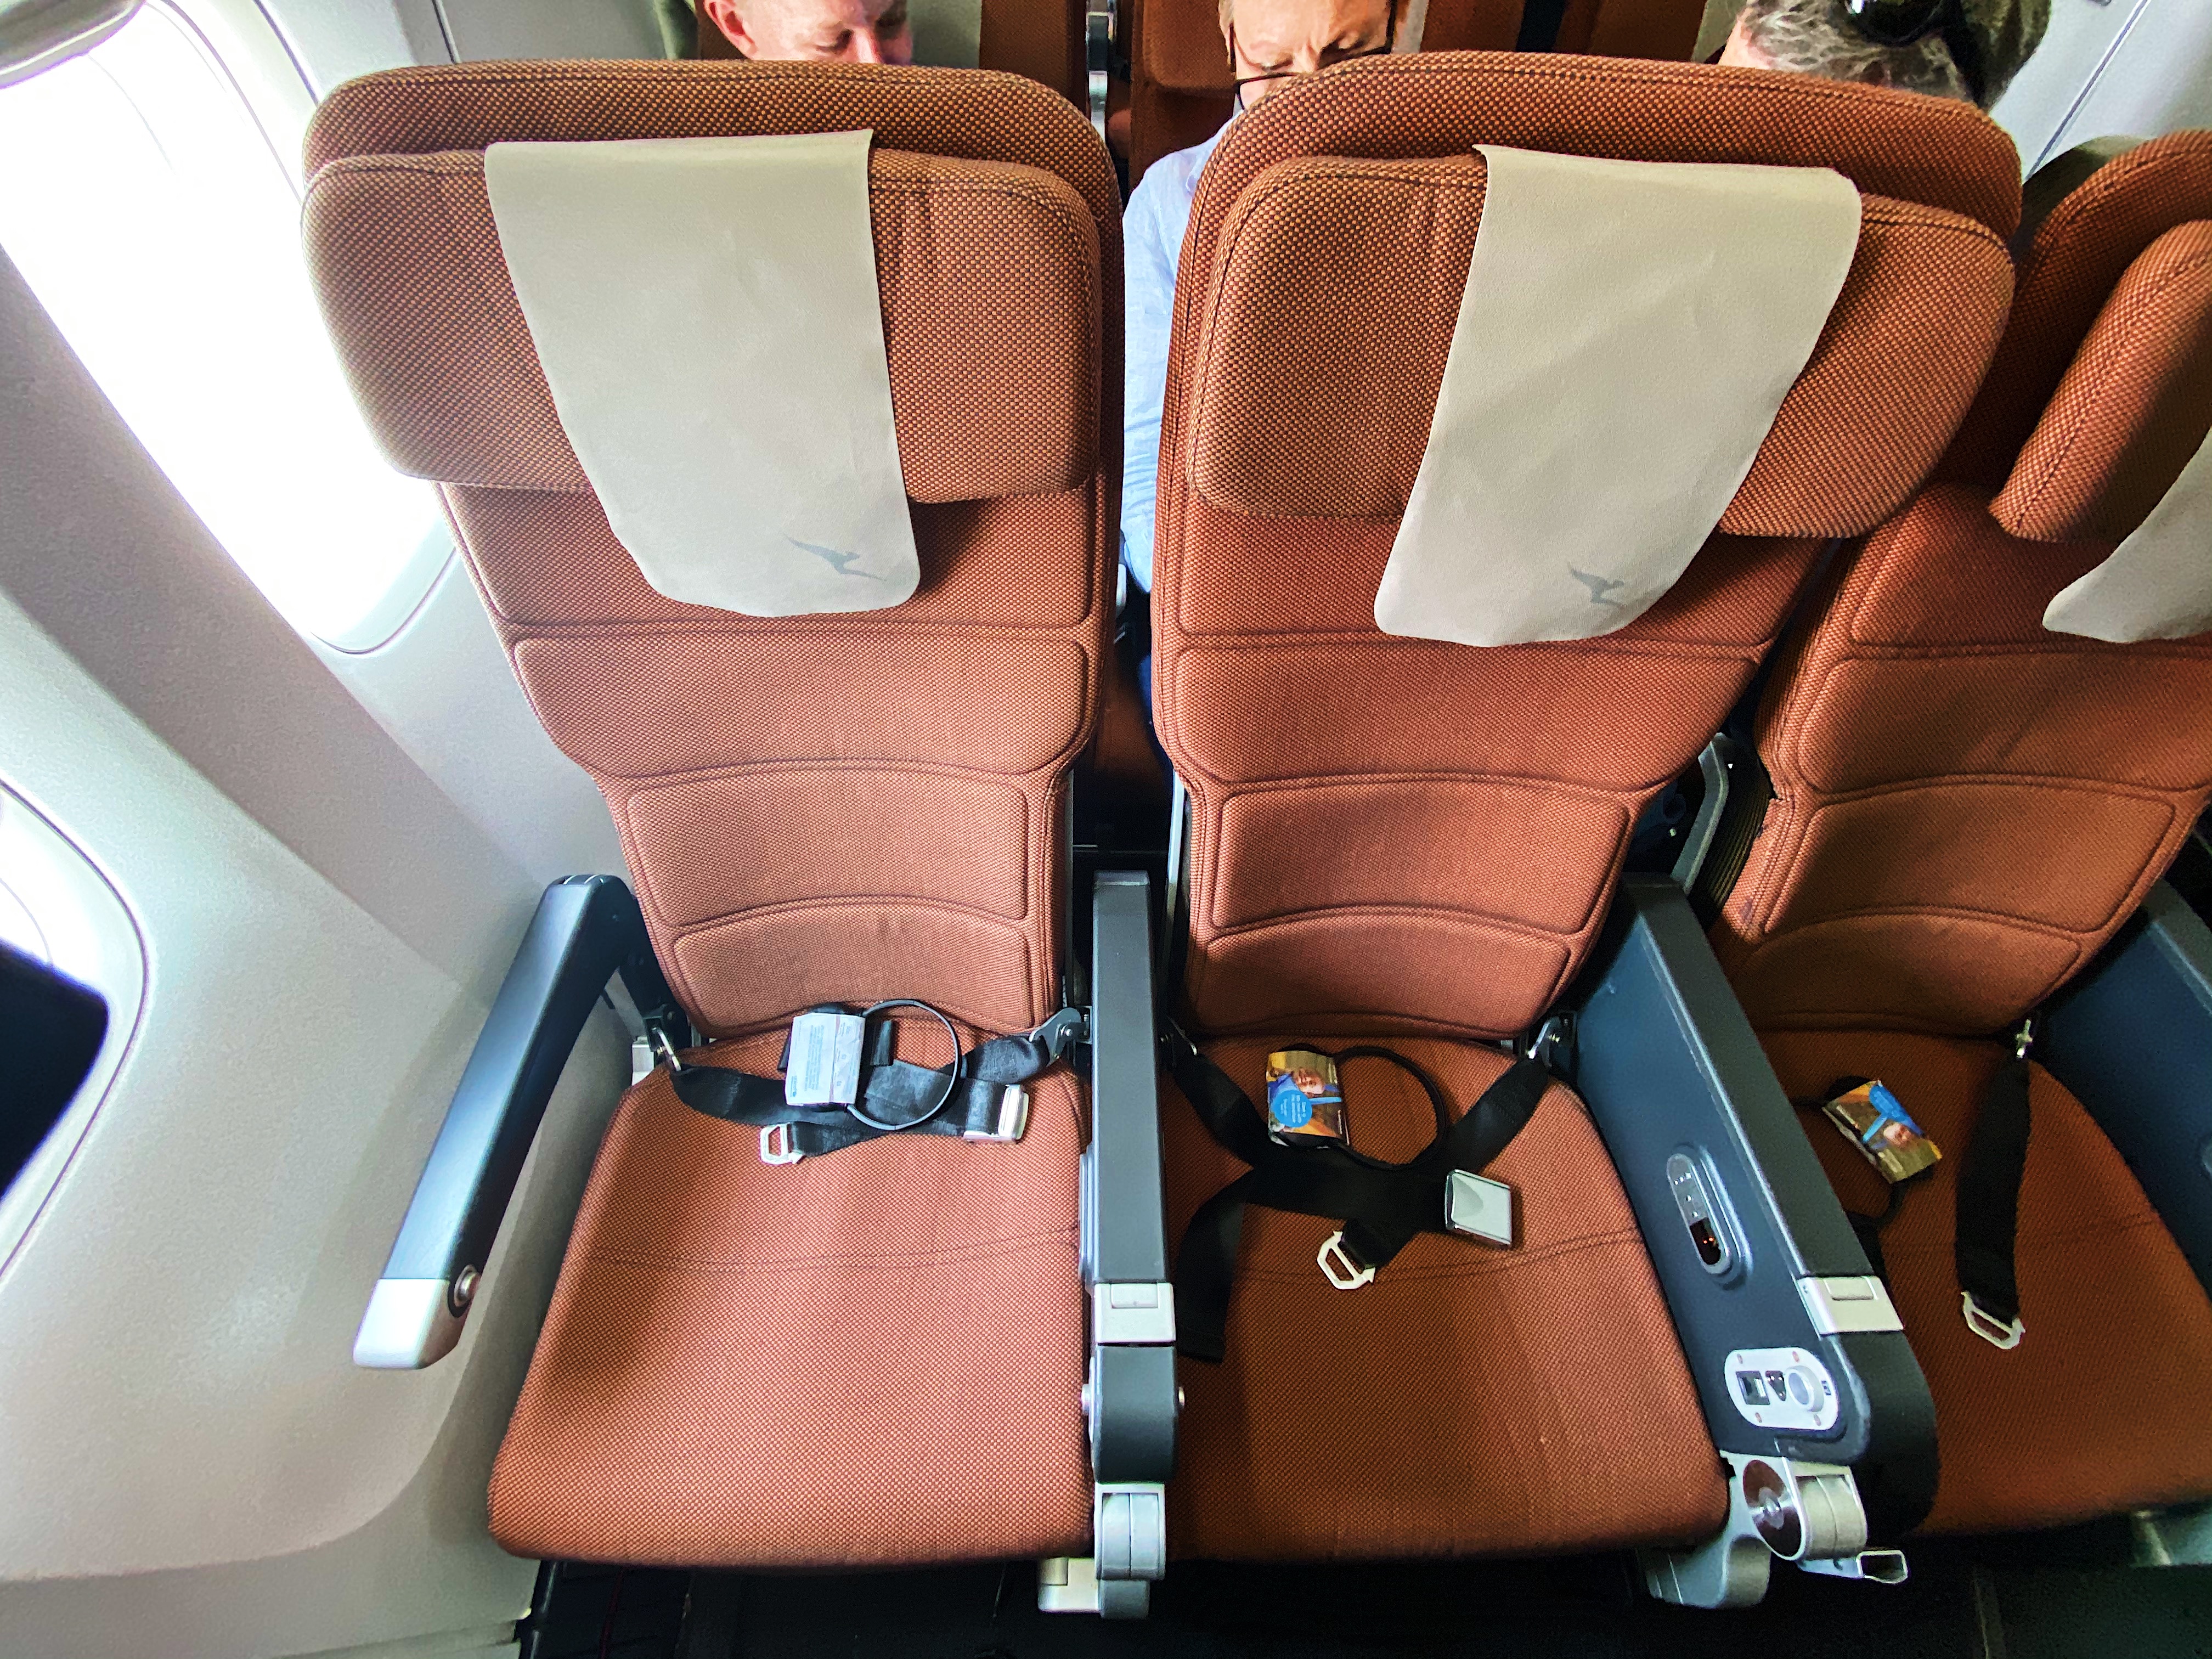 two seats on an airplane